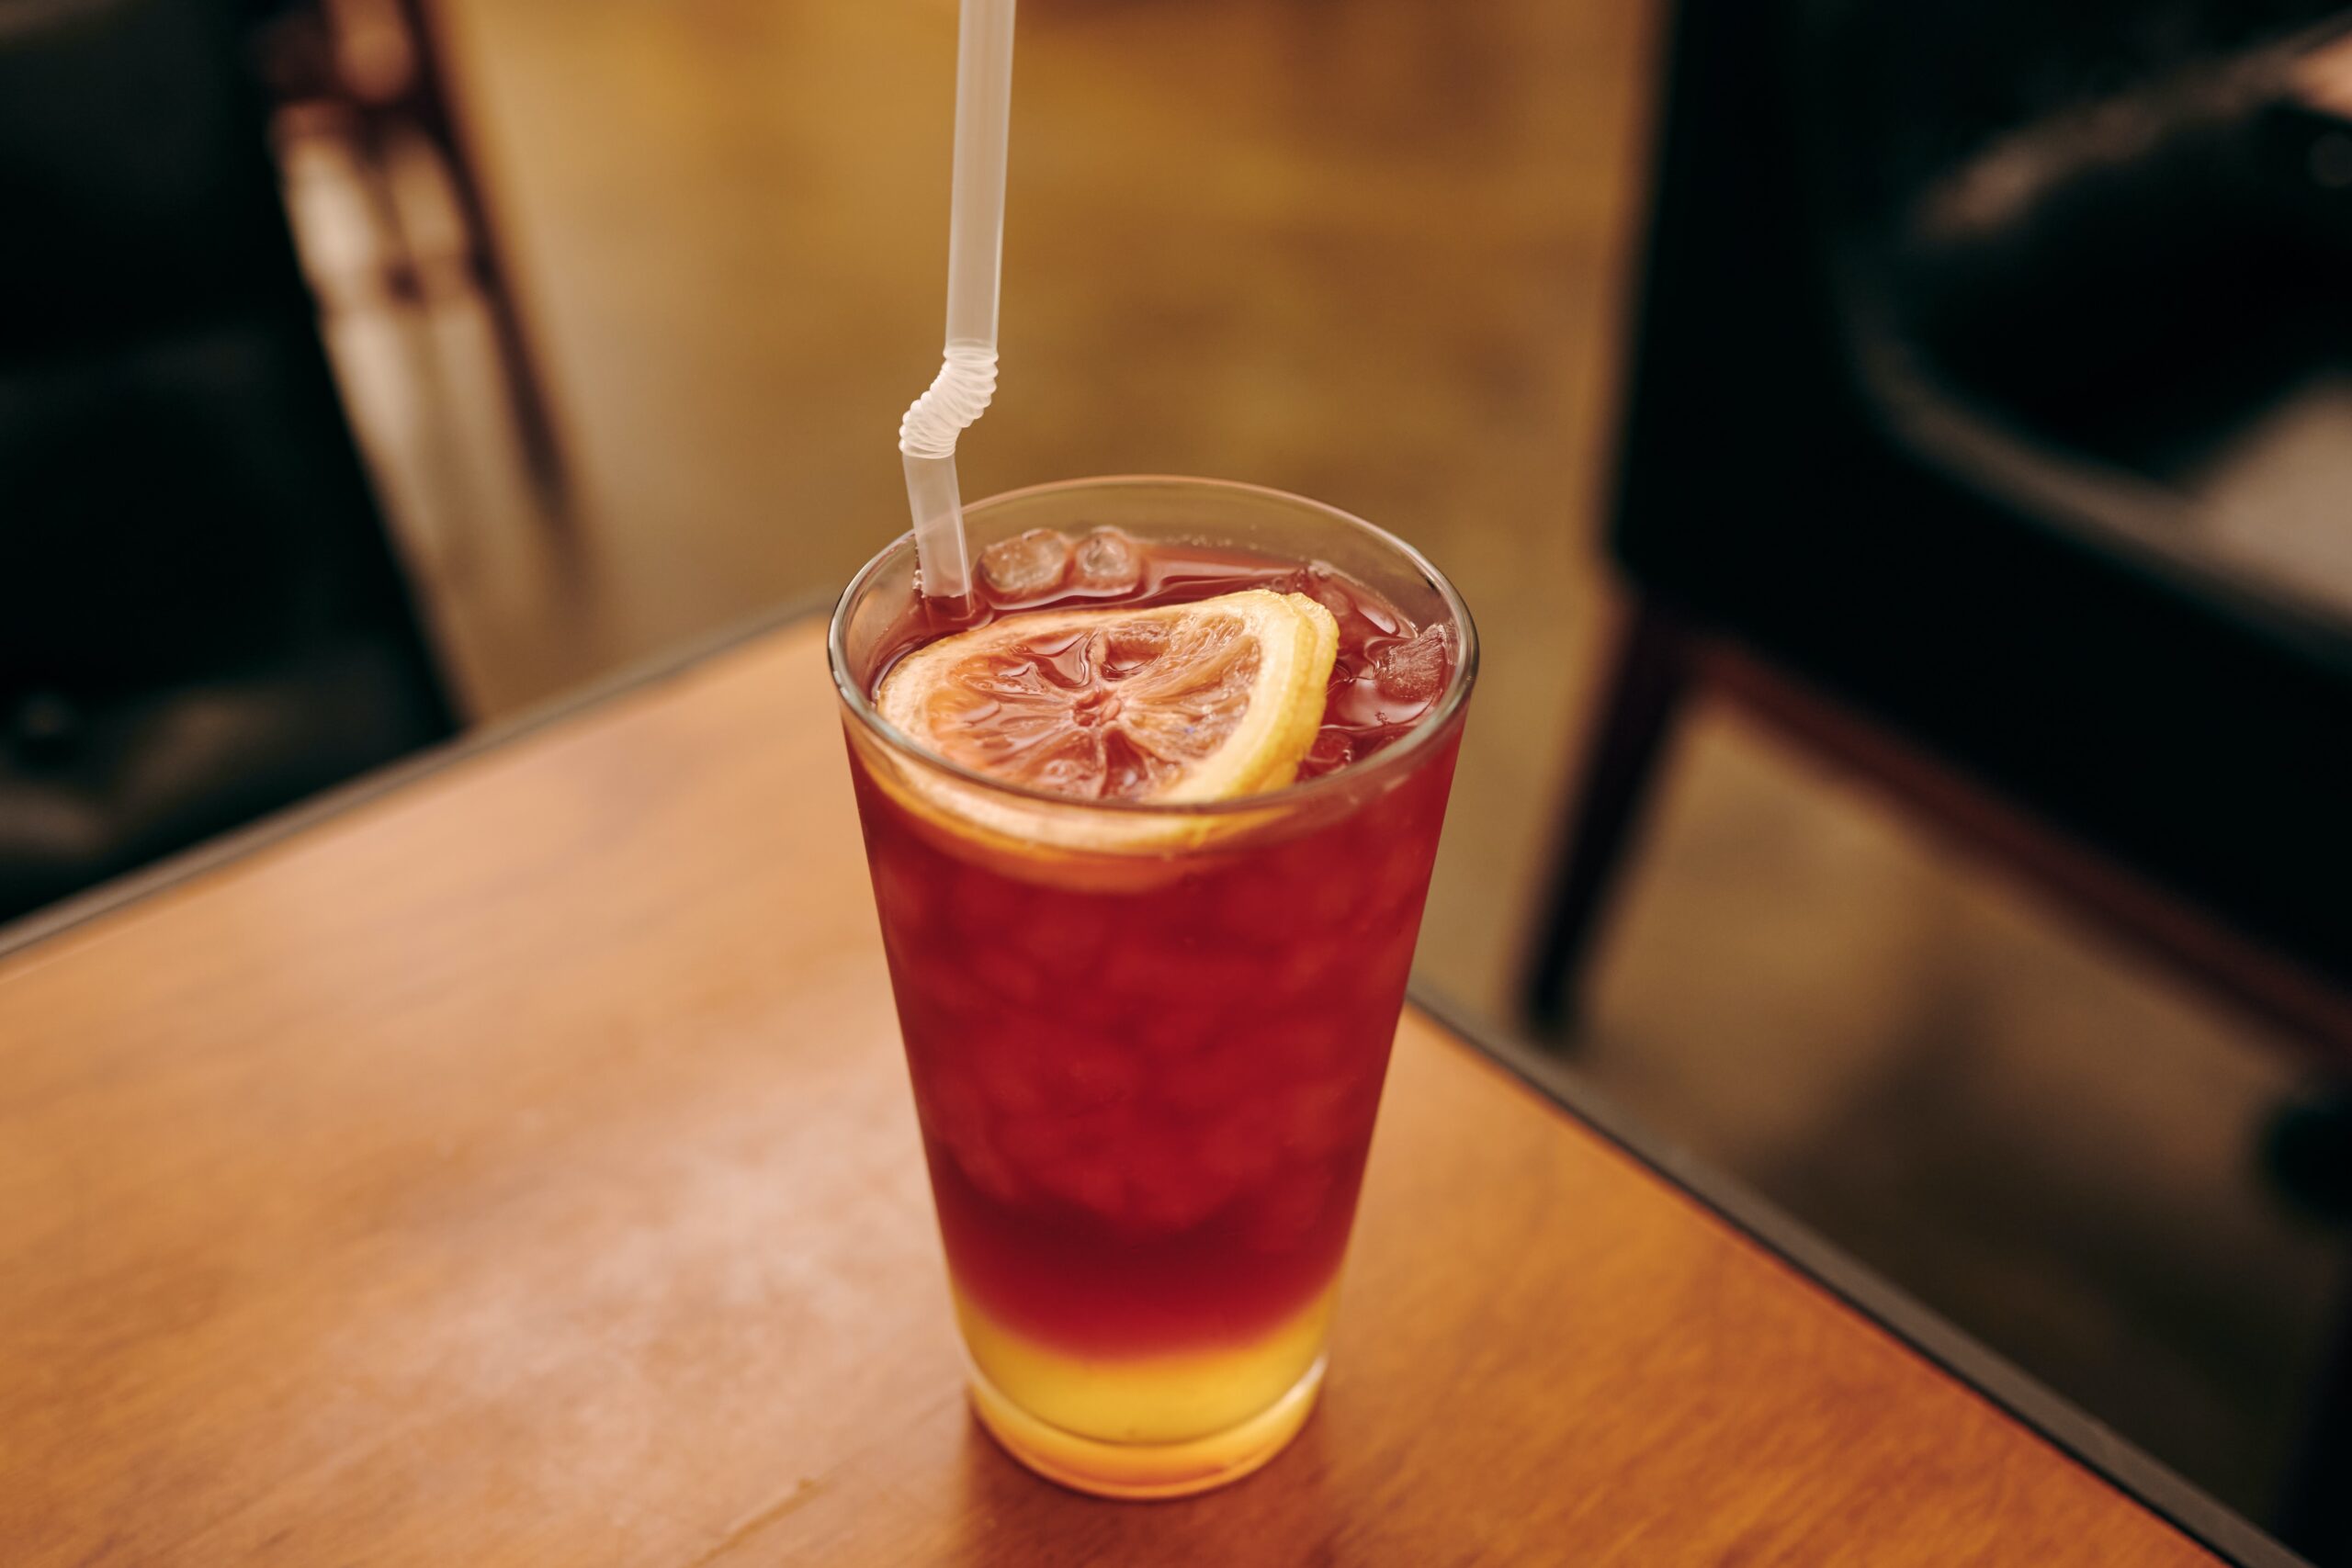 Add a touch of floral to your drink with this ginger beer mocktail idea. Pictured: A Hibiscus mocktail